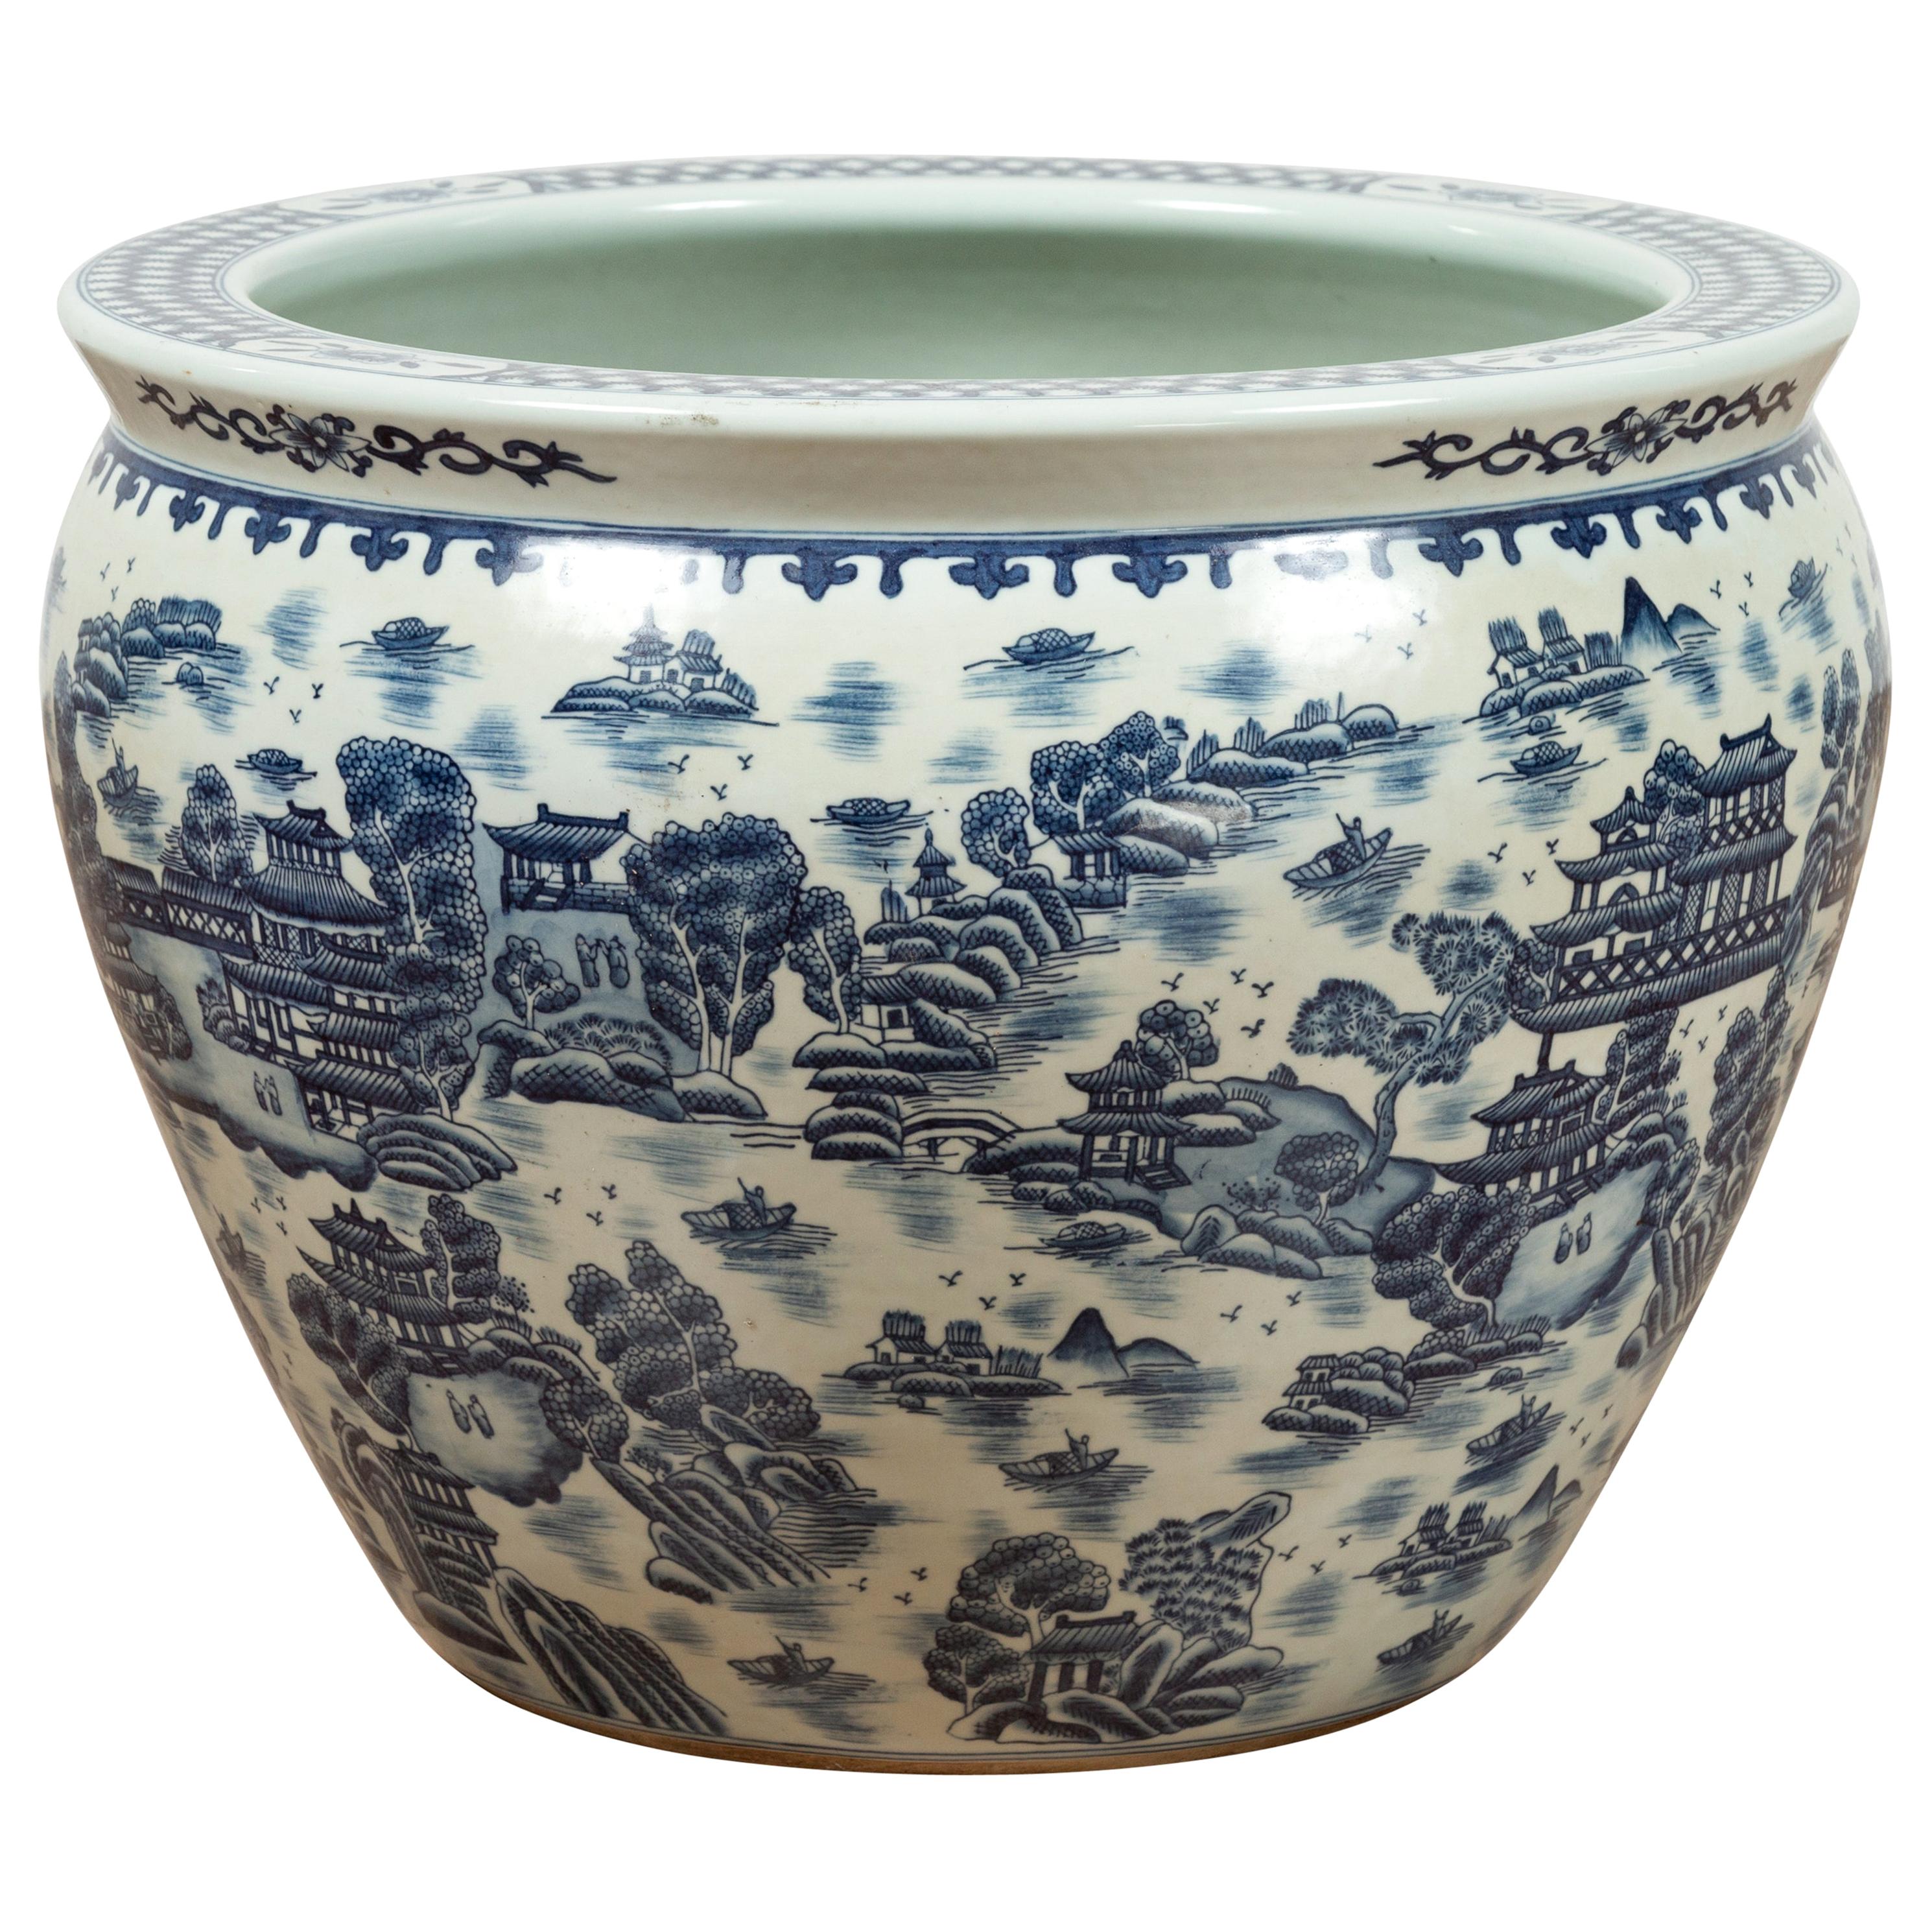 Large Chinese Blue and White Ceramic Planter with Architectures in Landscapes